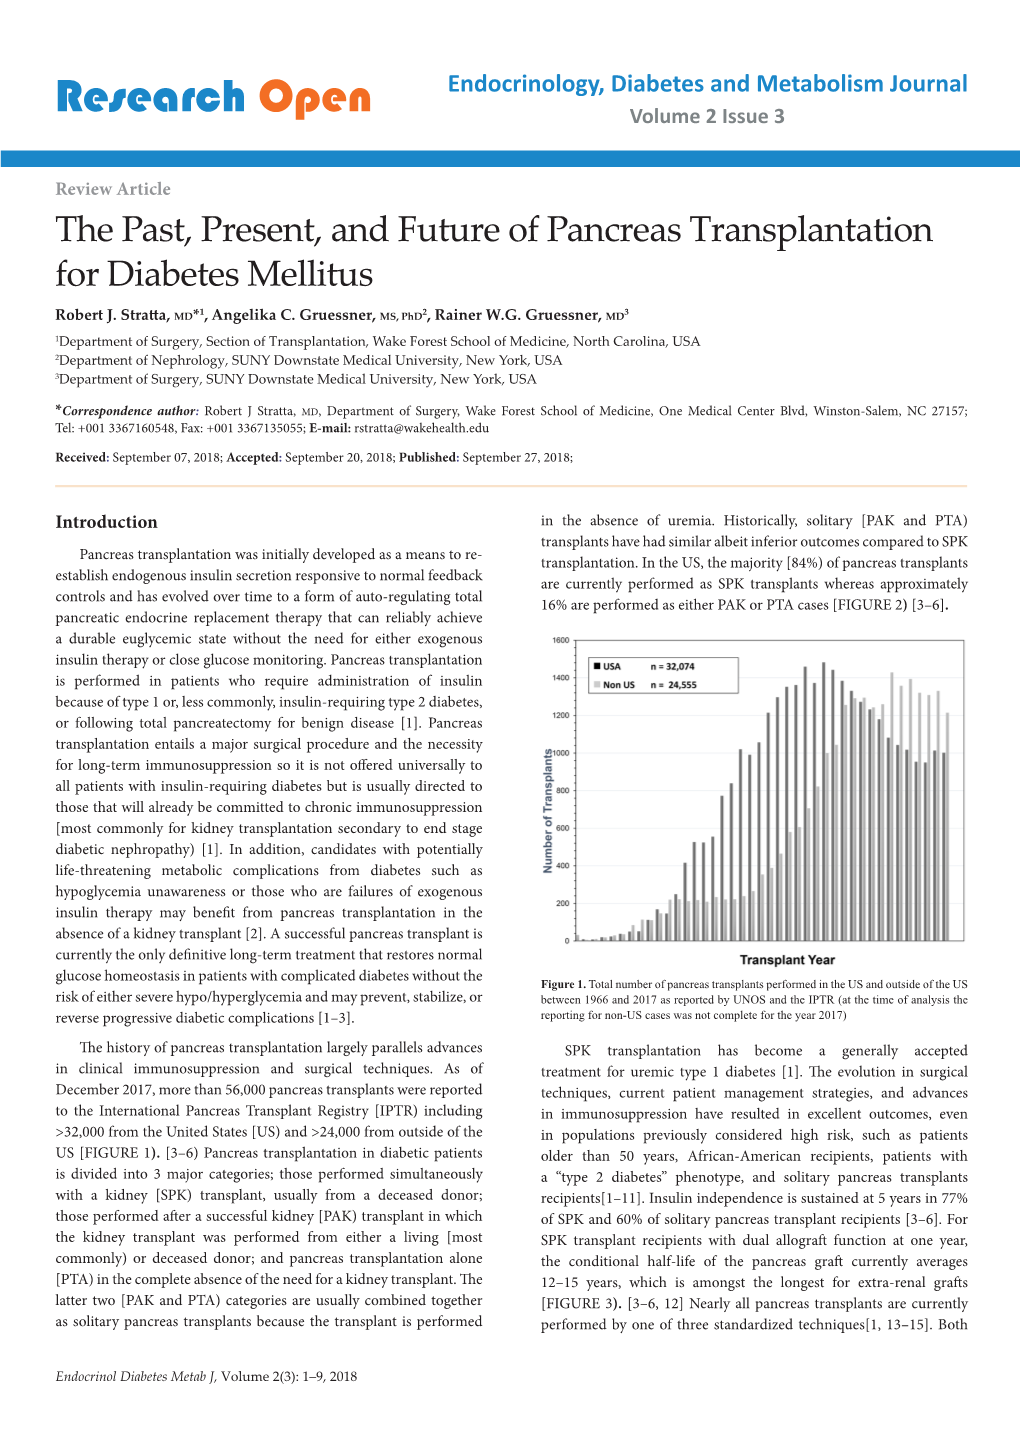 View Article the Past, Present, and Future of Pancreas Transplantation for Diabetes Mellitus